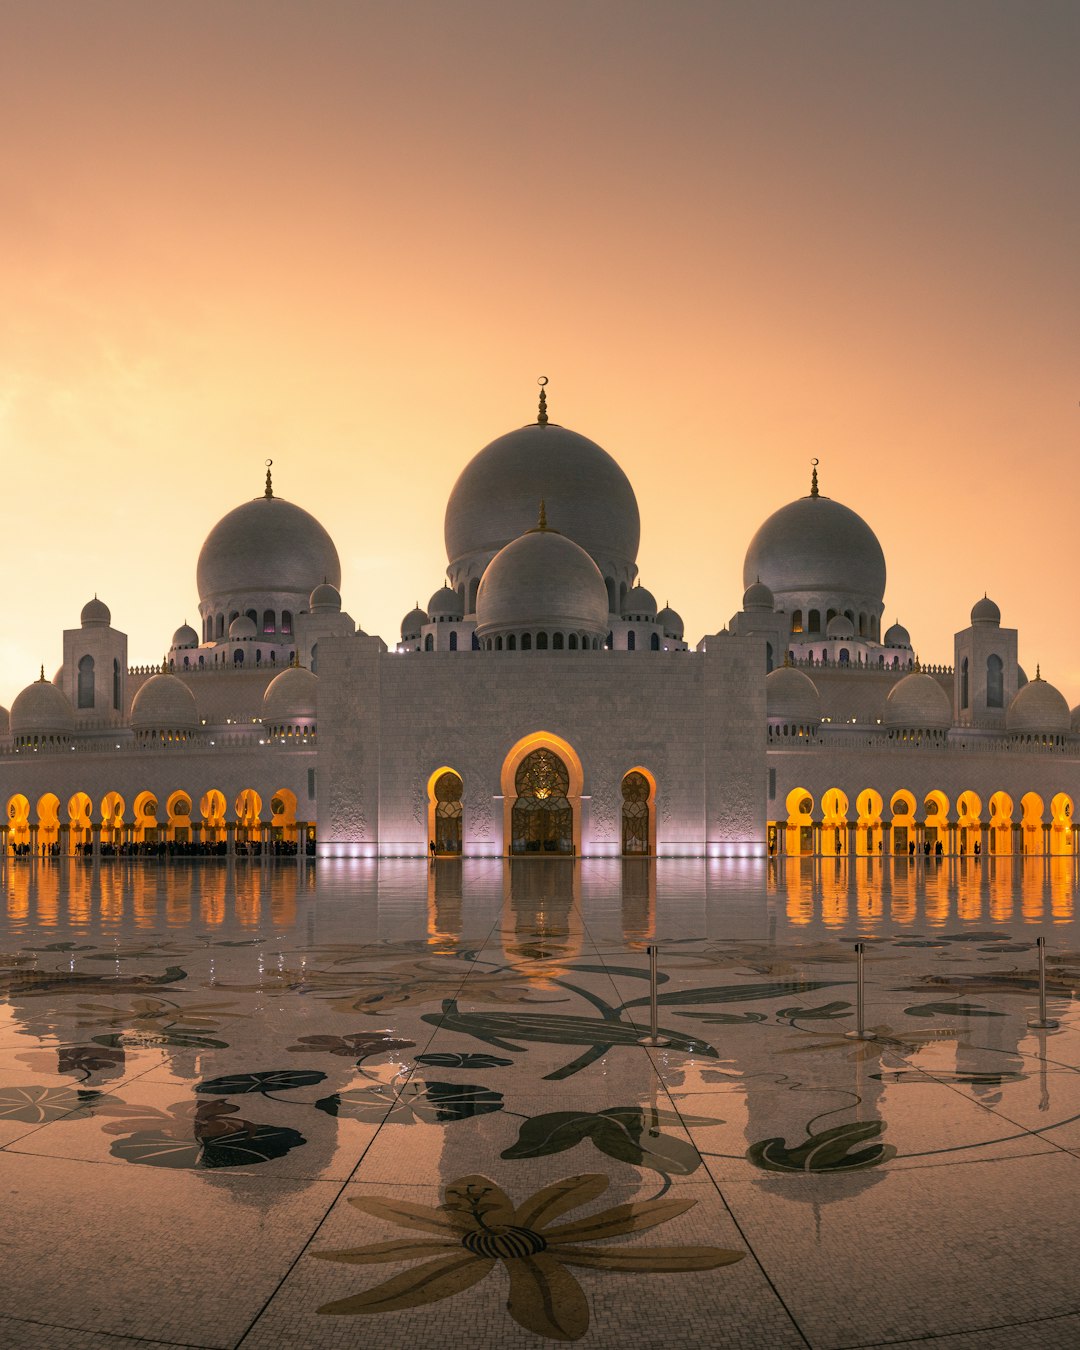 Sheik Zayed Franklin at sunset, photo of the beautiful mosque in front view, architecture photography, reflection on wet ground, long exposure, golden hour lighting, intricate floral patterns on marble, white and gold color palette, high resolution, detailed texture, majestic, iconic.